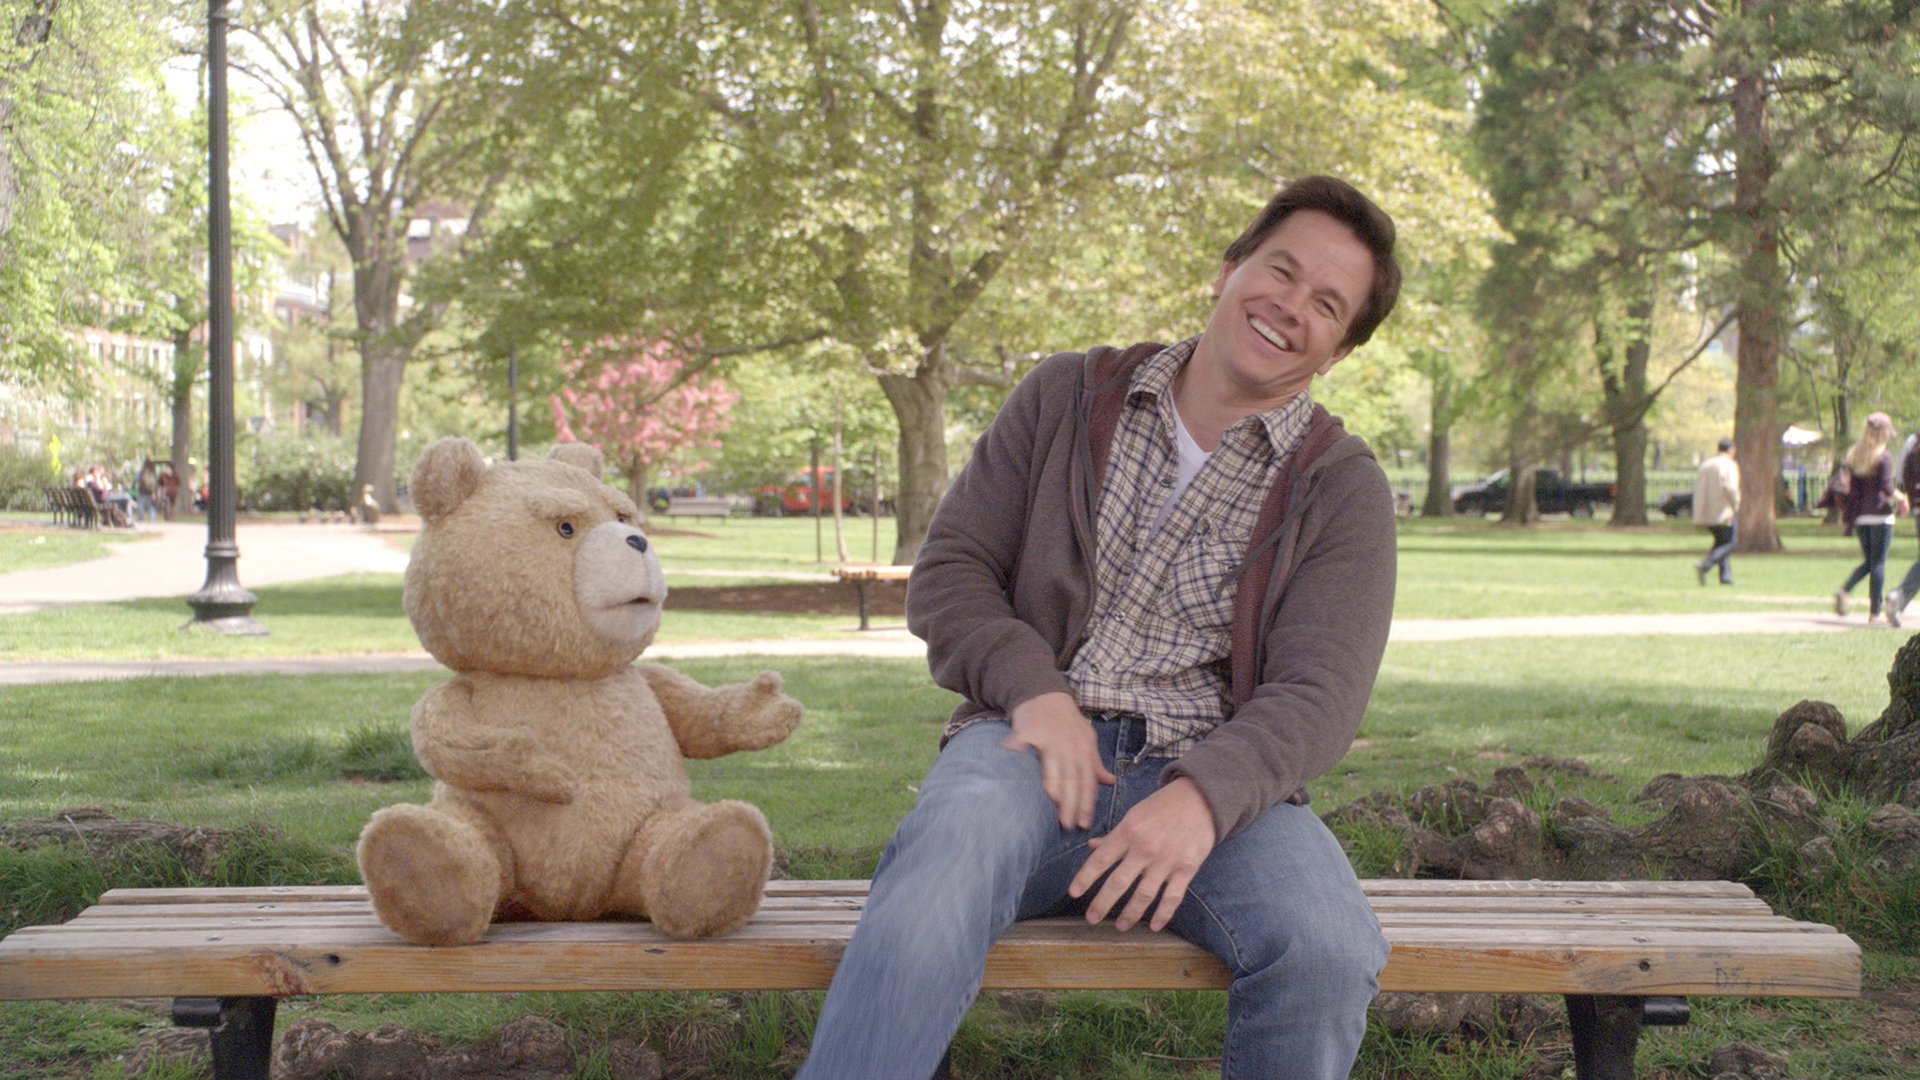 movie, ted, mark wahlberg, ted (movie character)